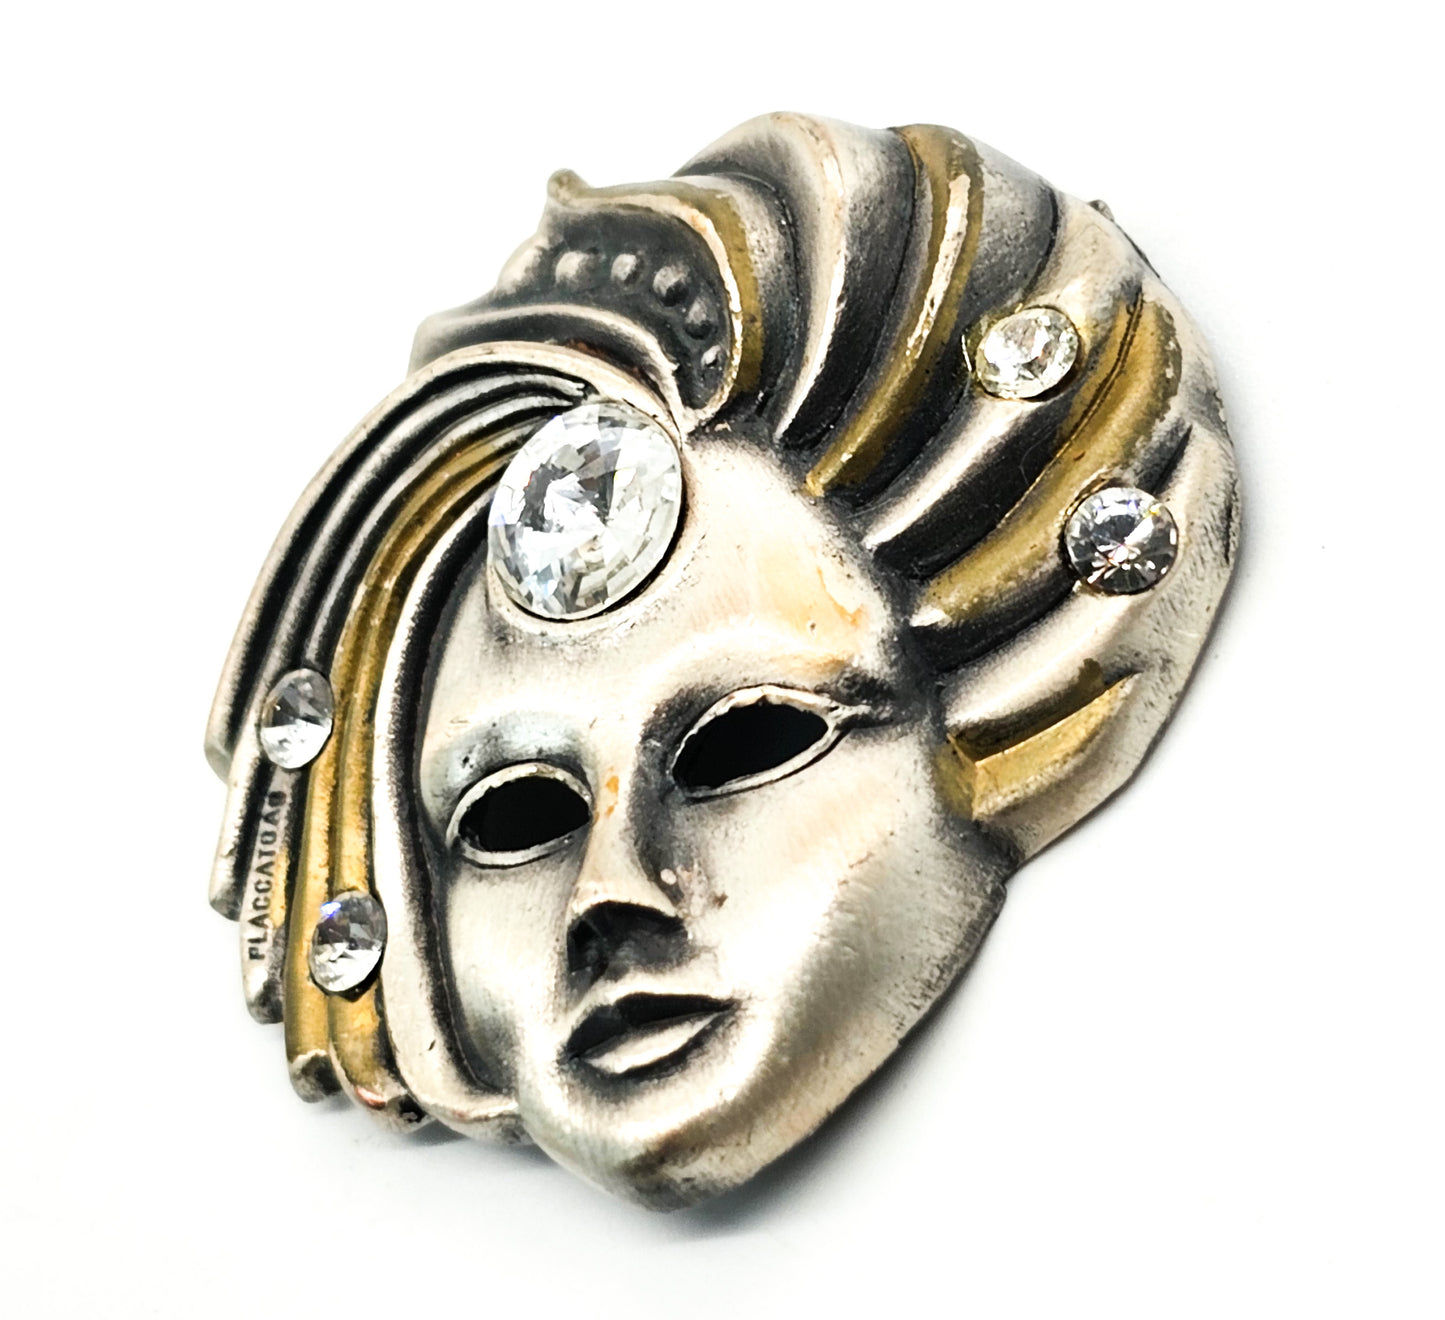 Placcato Ag Carnival mask pewter bronze vintage rhinestone brooch